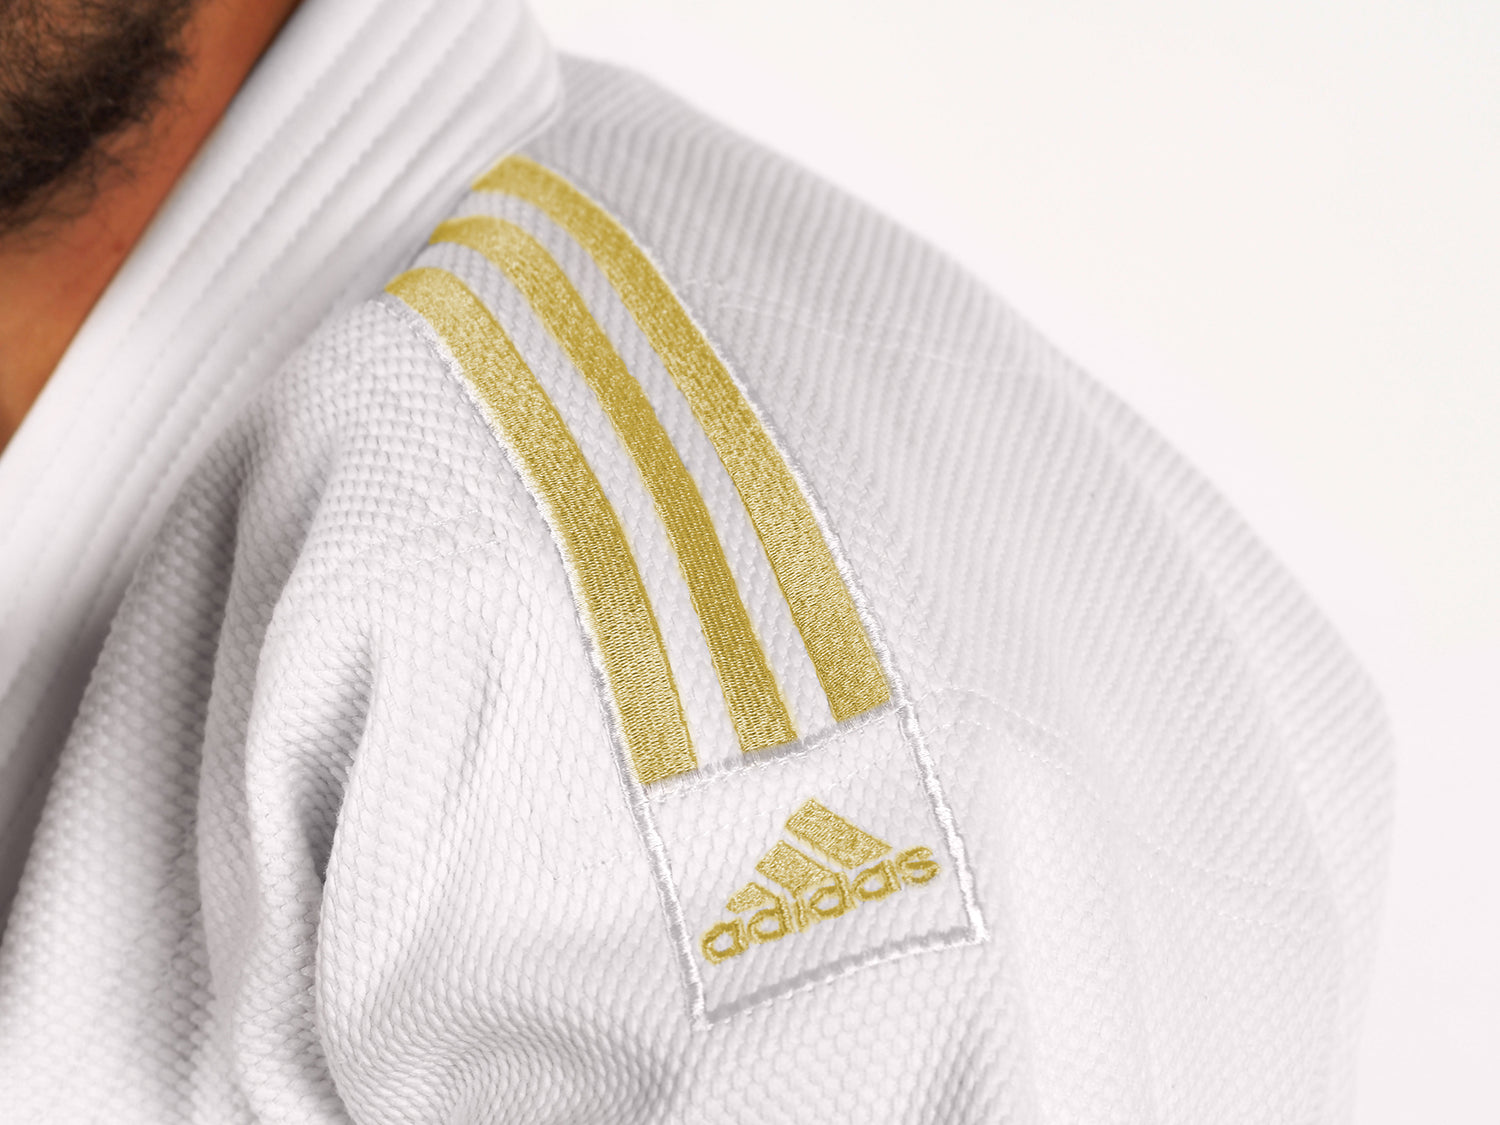 J690 Quest White & Gold  -  Double Weave by Adidas - Budovideos Inc